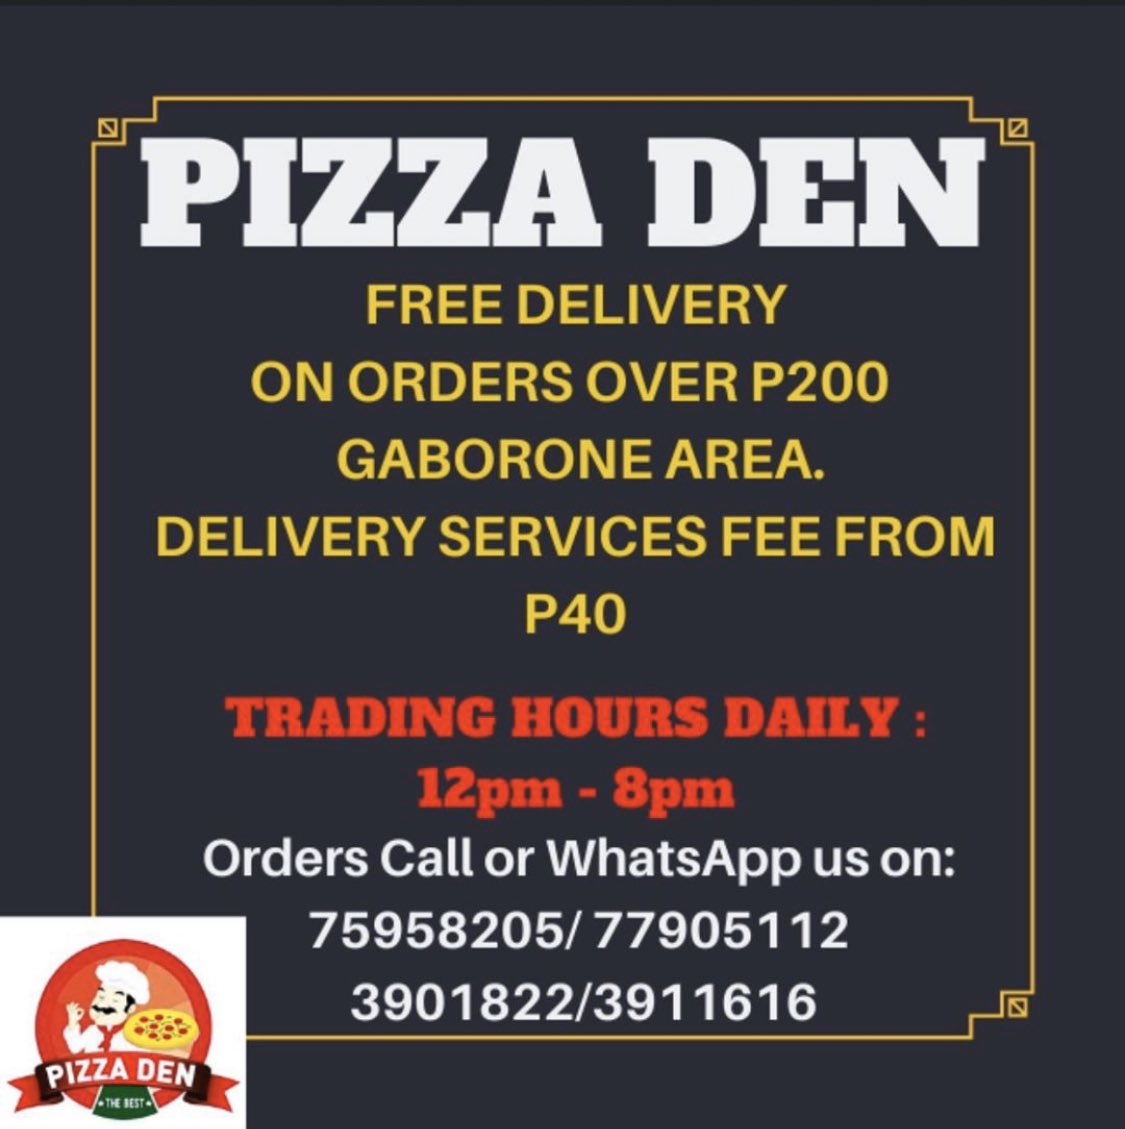 If you are feeling like pizza or Indian food , pizza den got you . Free delivery for orders over P200 and P40 delivery fee for orders Below . Orders can be placed using WhatsApp or calling. numbers 75958205 or 77905112